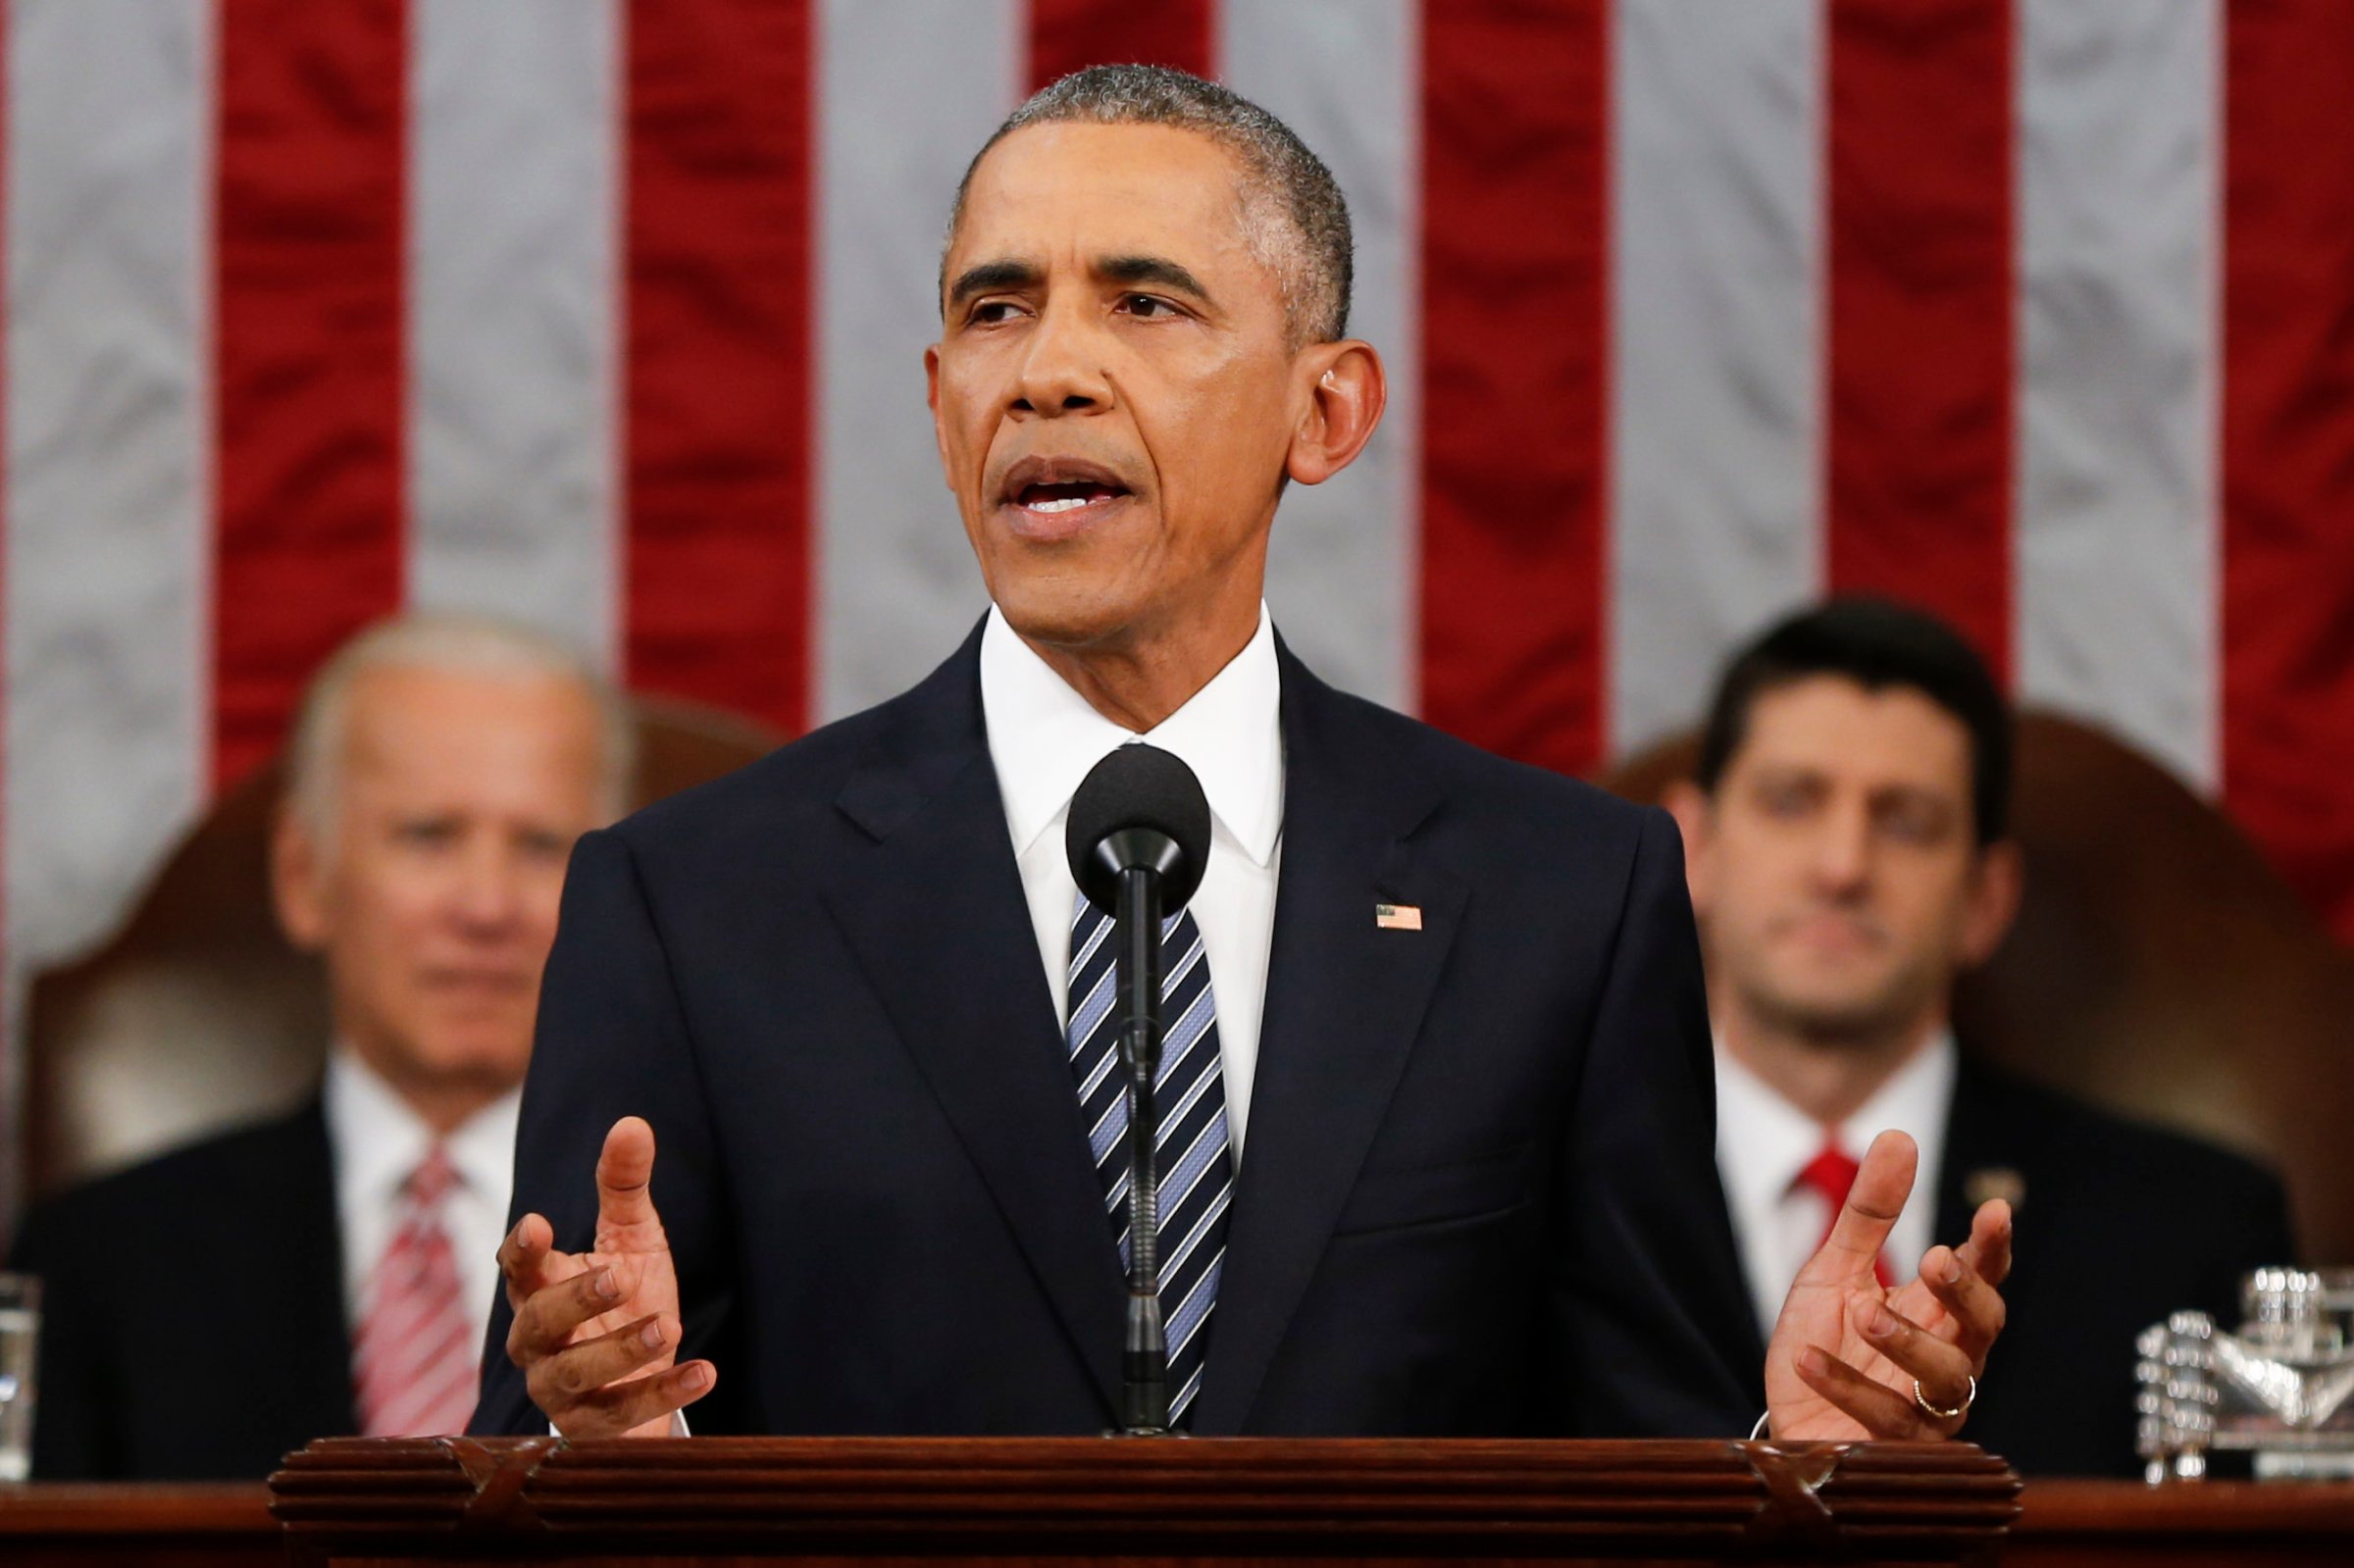 President Barack Obama delivers his State of the Union address before a joint session of Congress on Capitol Hill in Washington, D.C., on Jan. 12, 2016.